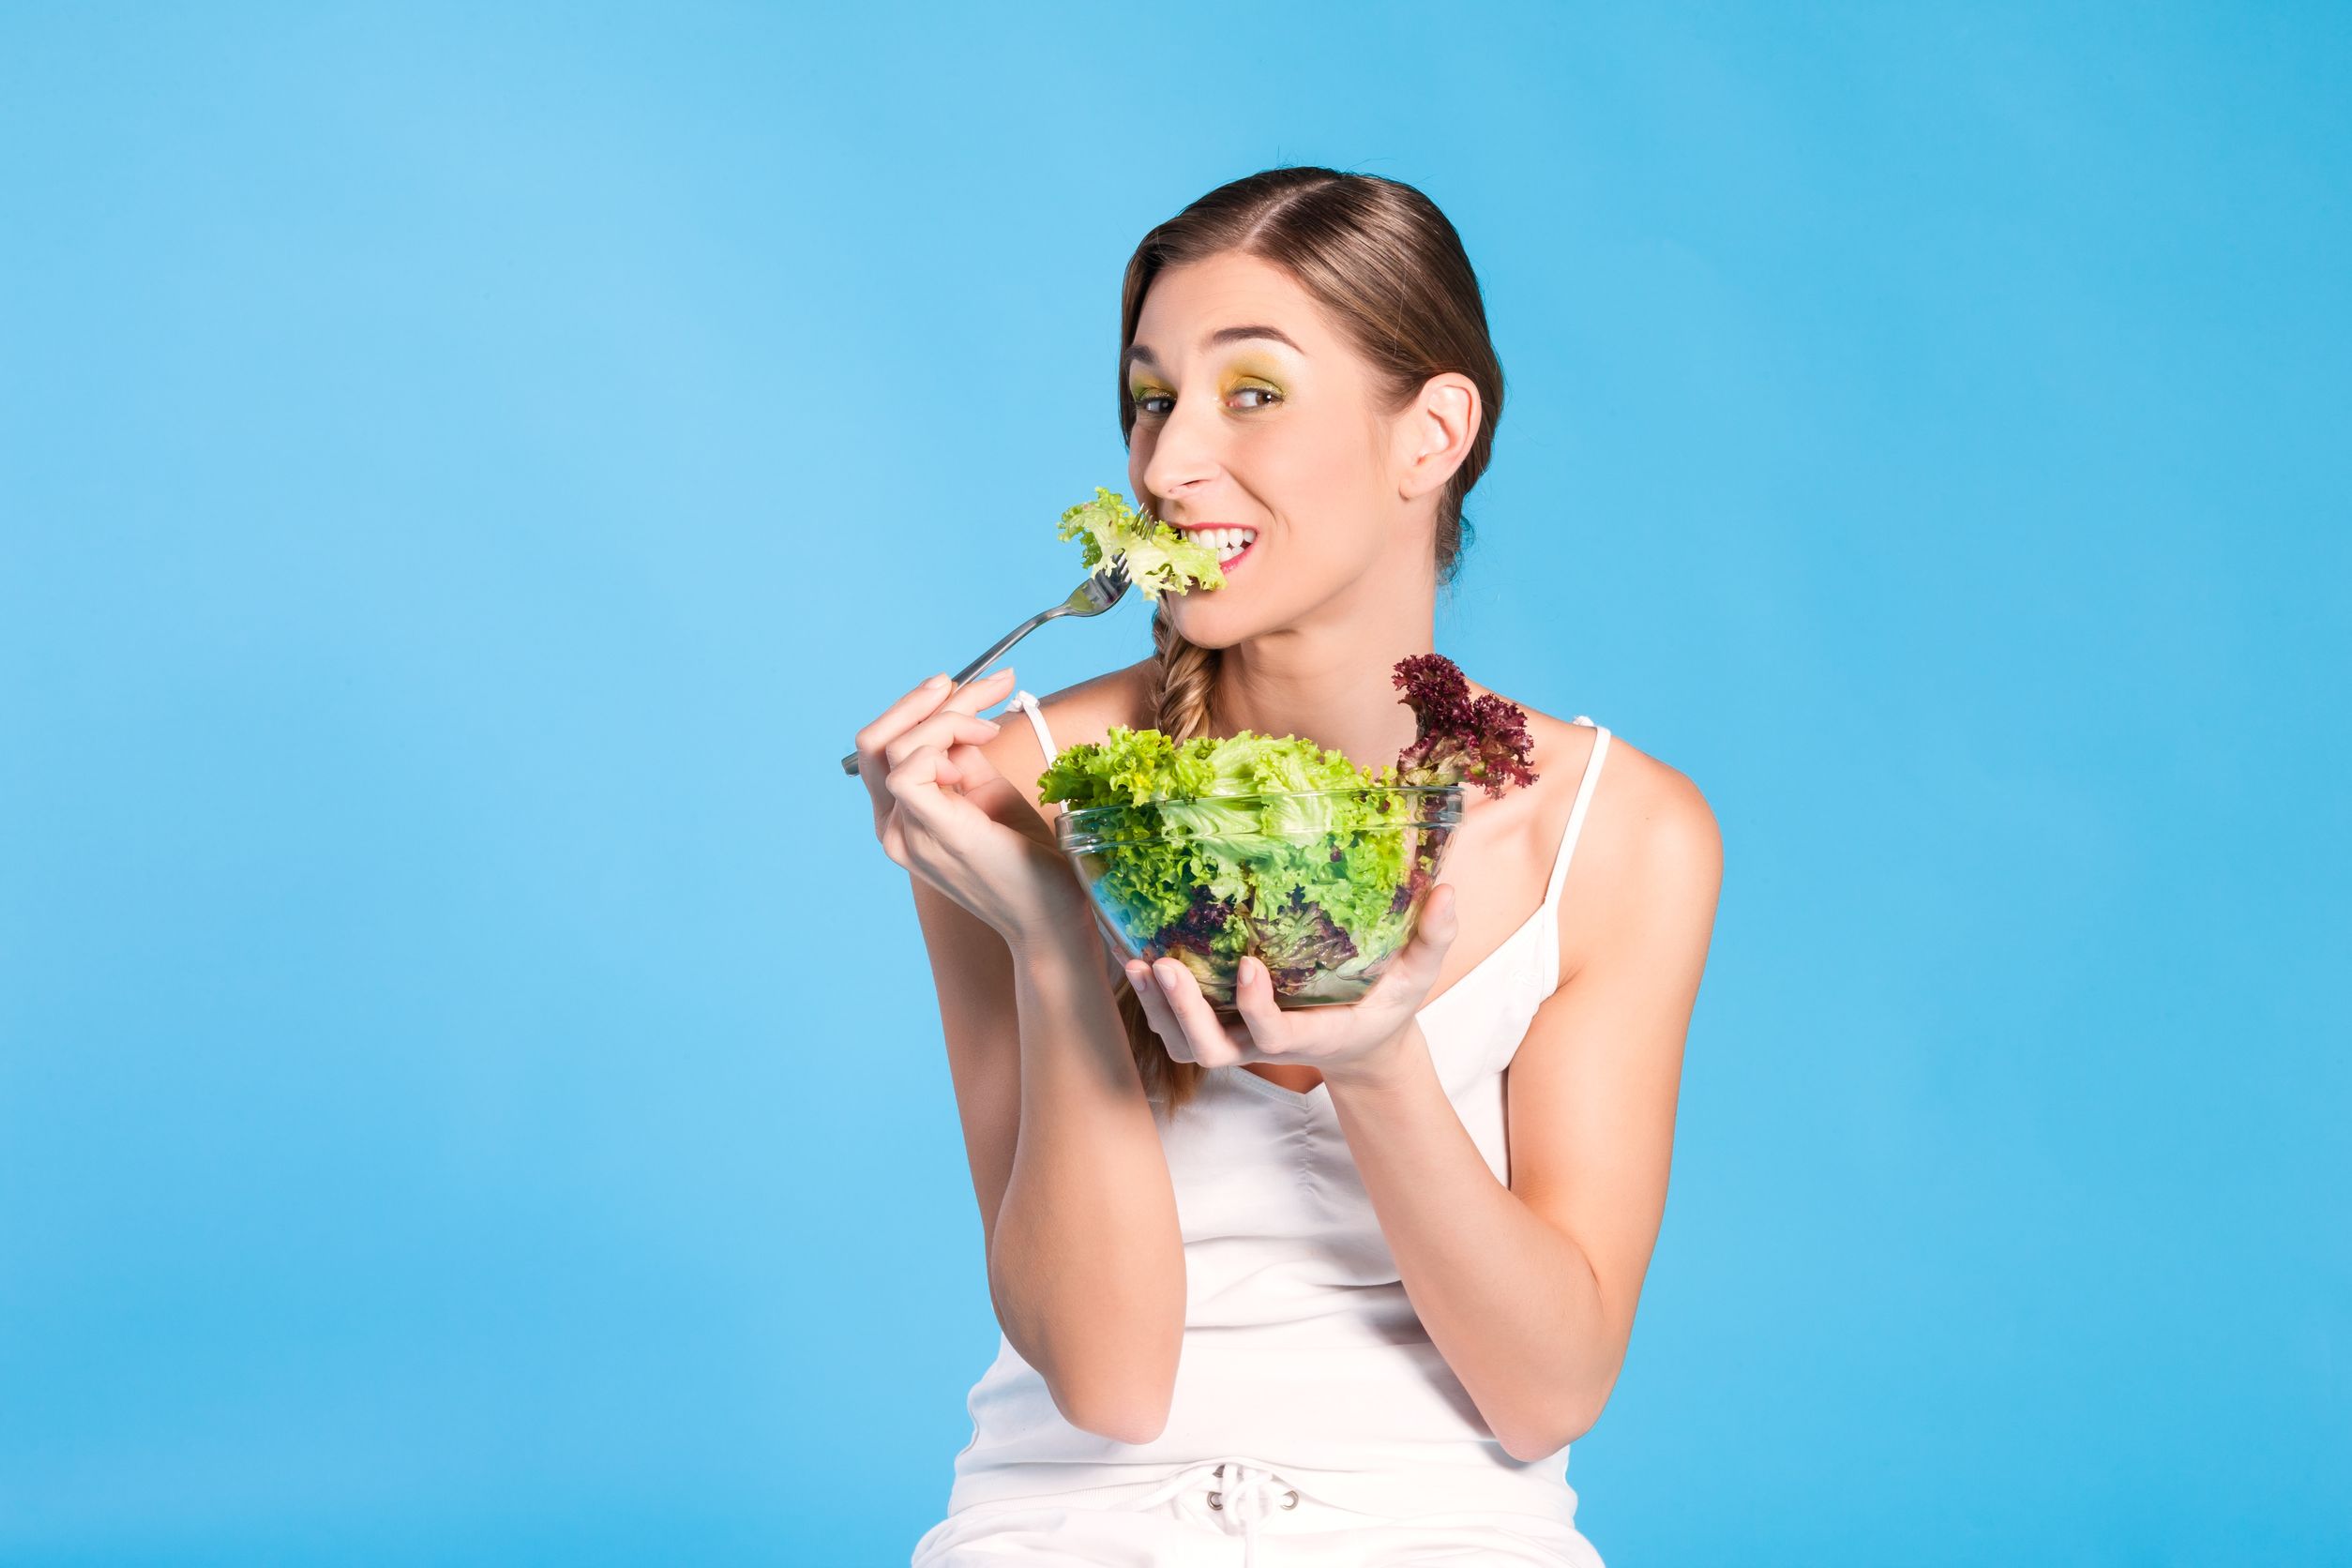 19942166_l-Healthy-eating-woman-with-fresh-salad-and-vegetables